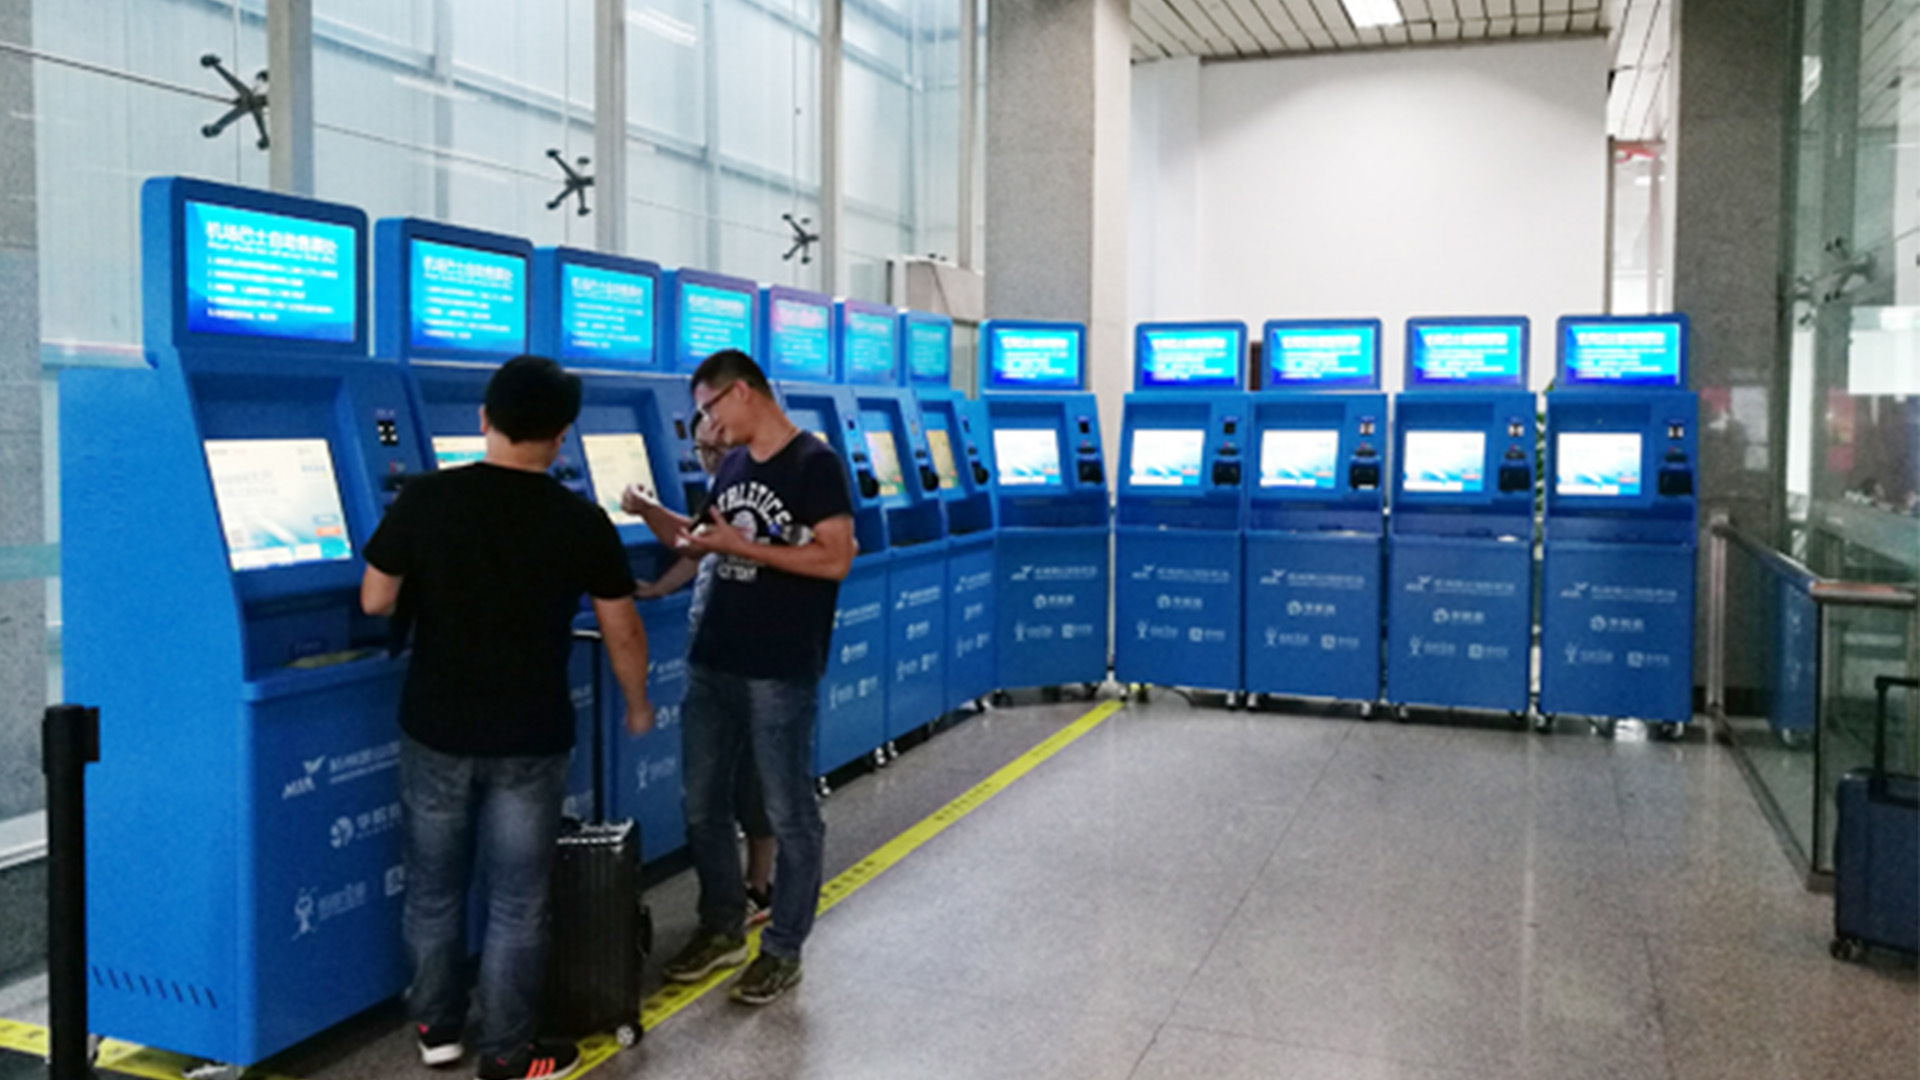 Application of Masung Printer in Self-service Ticket Sales and Collection at Bus Terminal